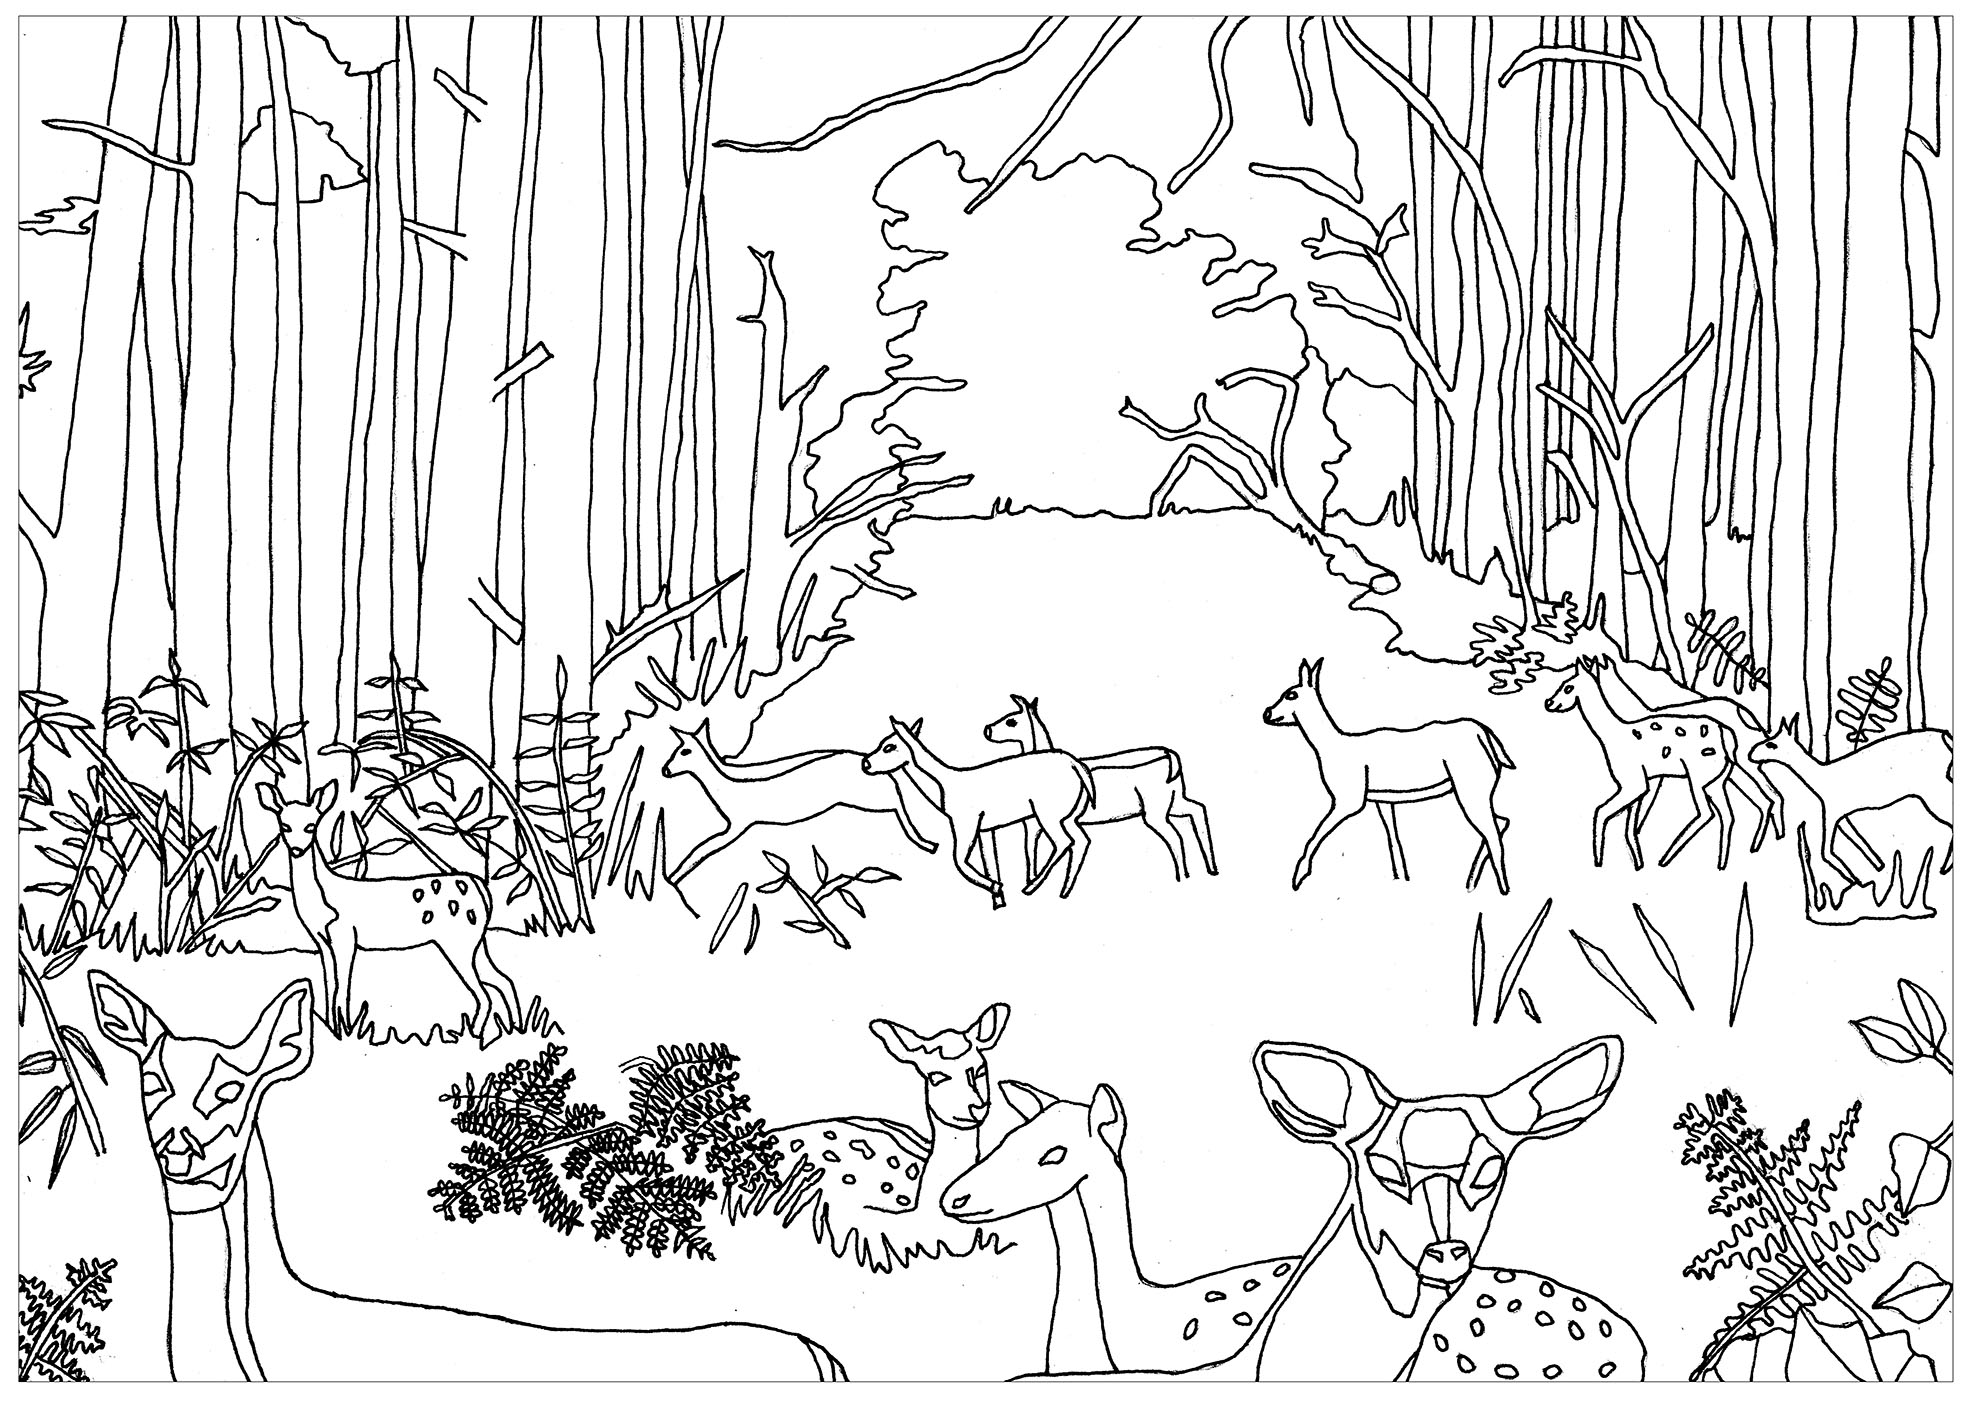 Does and Fawns in the forest, Artist : Marion C